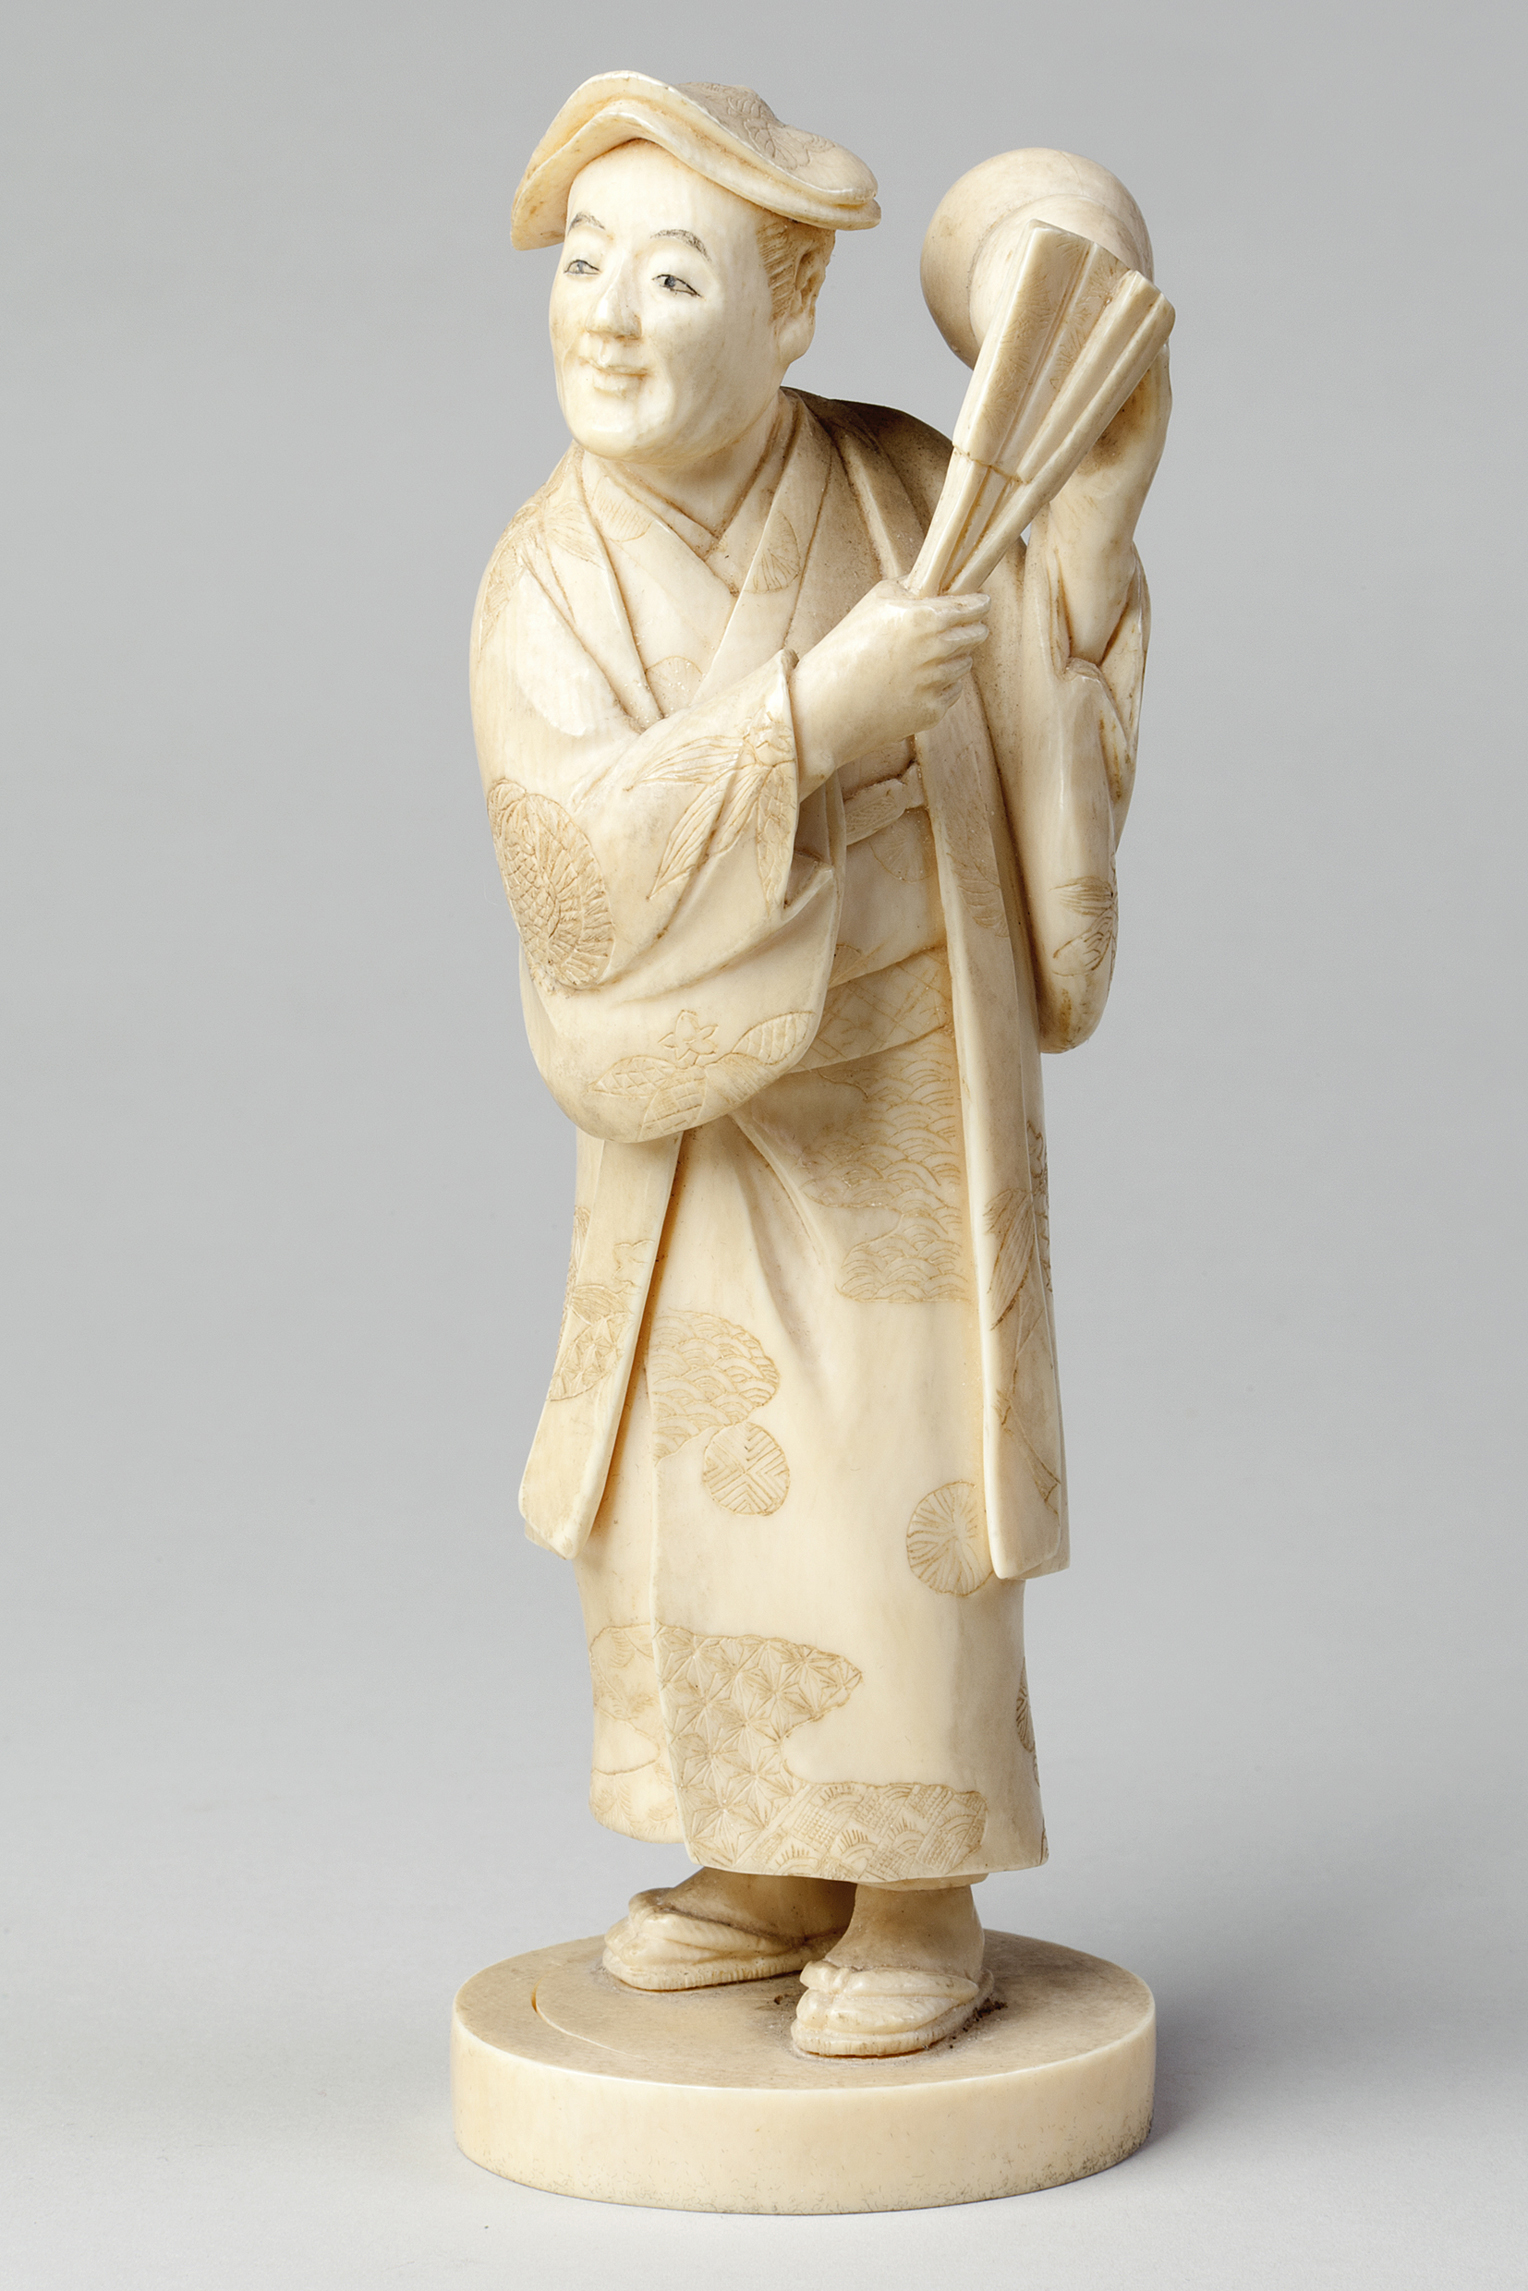 Japanese Carved Okimono Figure of a Man with a Fan. Meiji Period, 1868-1912. Presented in 1968 by Miss V Thomson. © Aberdeen City Council (Art Gallery and Museums Collections)